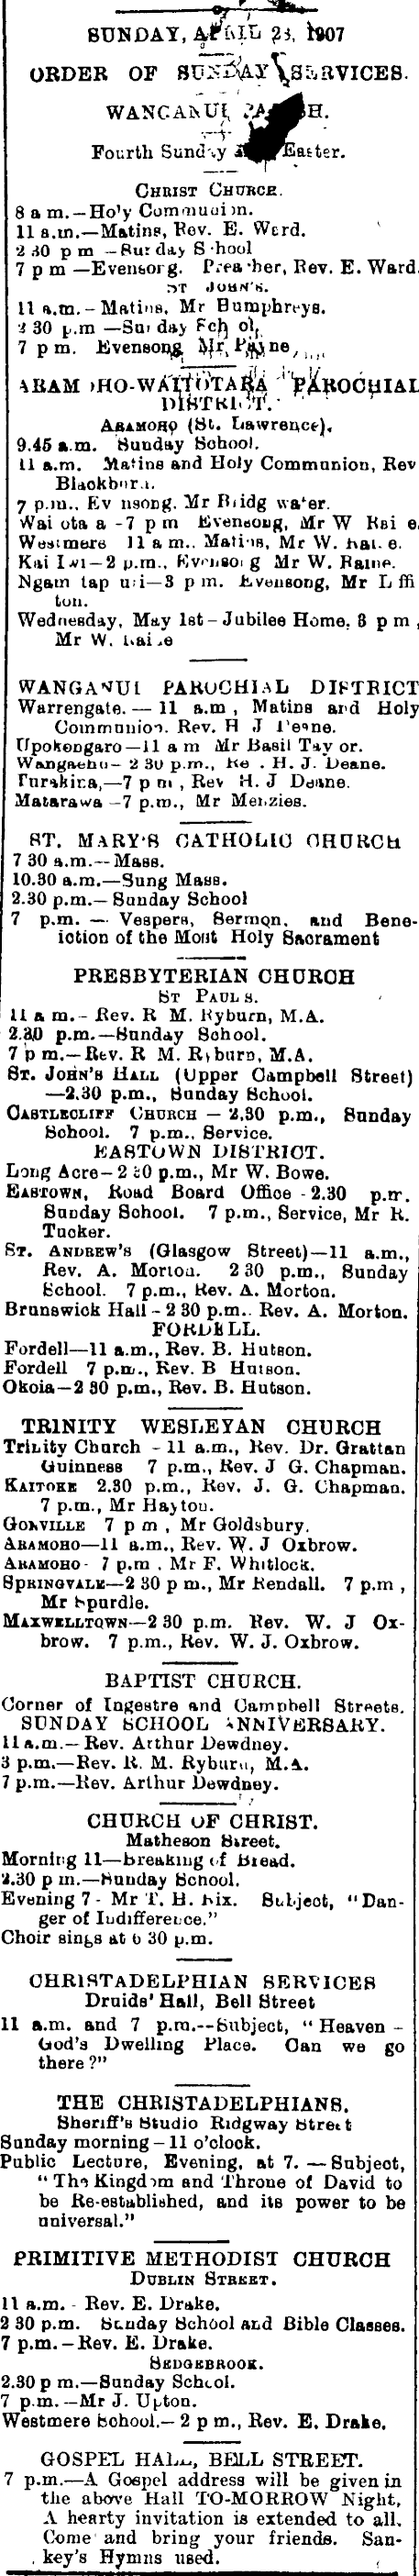 Papers Past Newspapers Wanganui Herald 27 April 1907 Church Services